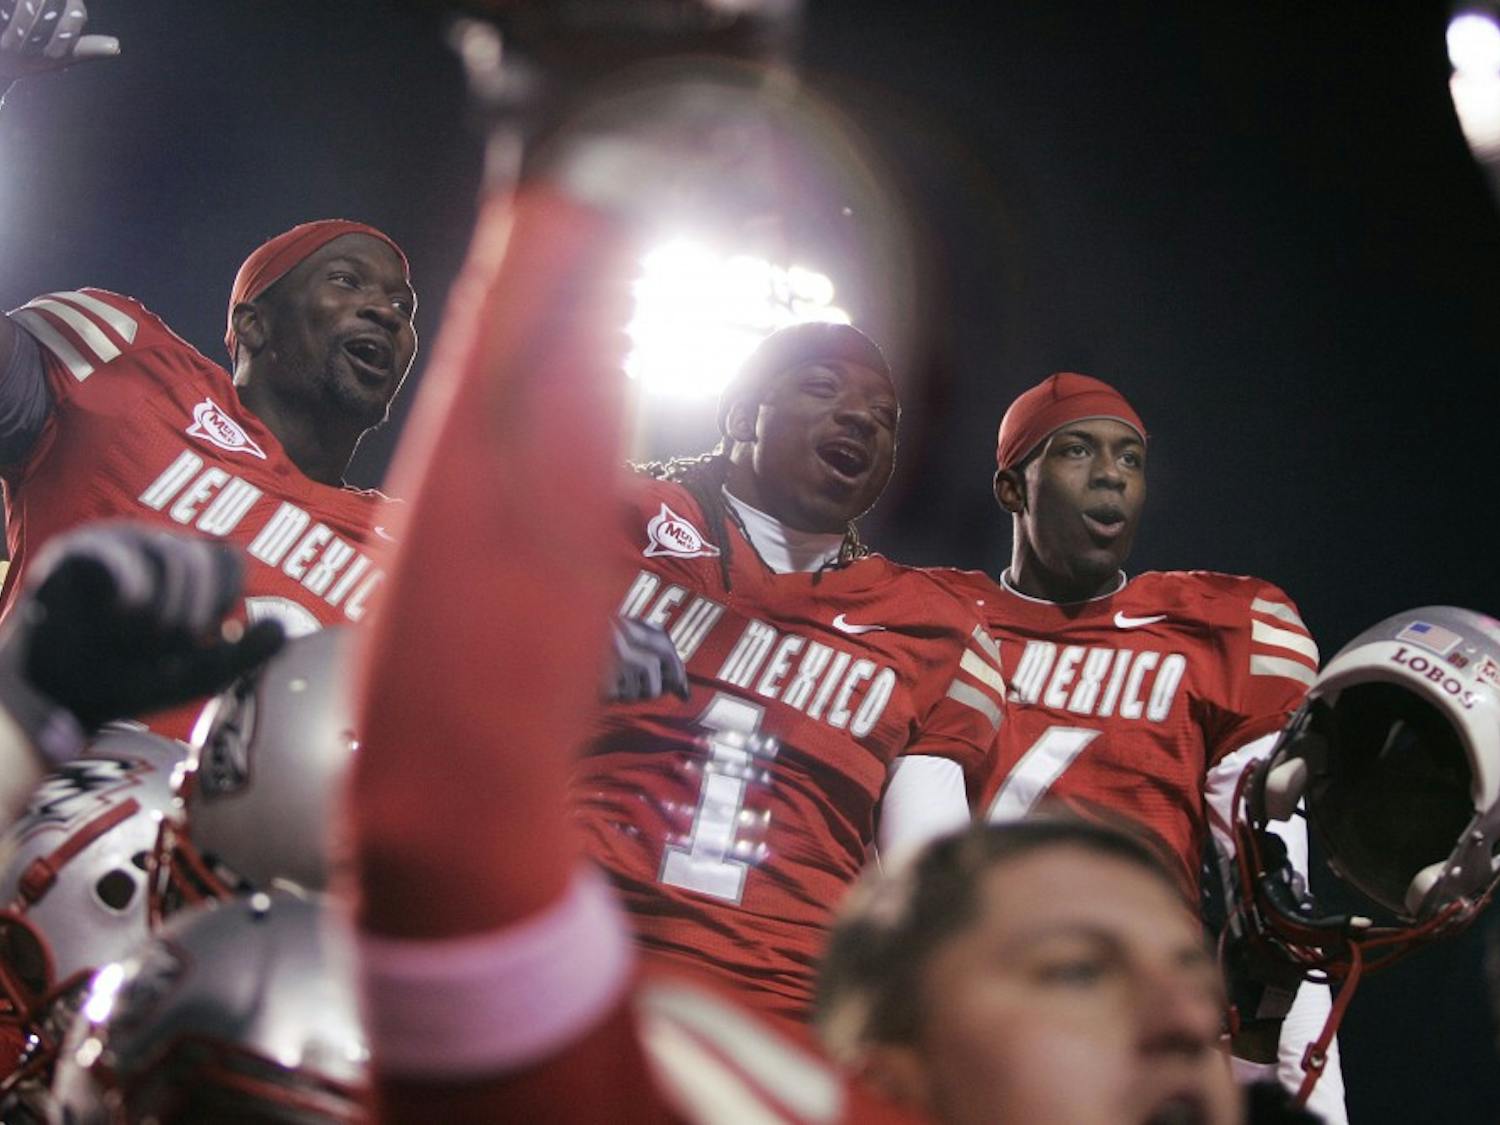 	Demond Dennis, middle, celebrates alongside fellow running back James Wright, left, and cornerback Anthony Hooks, right. UNM won its first game of the season, a narrow 29-27 win over Colorado State.

